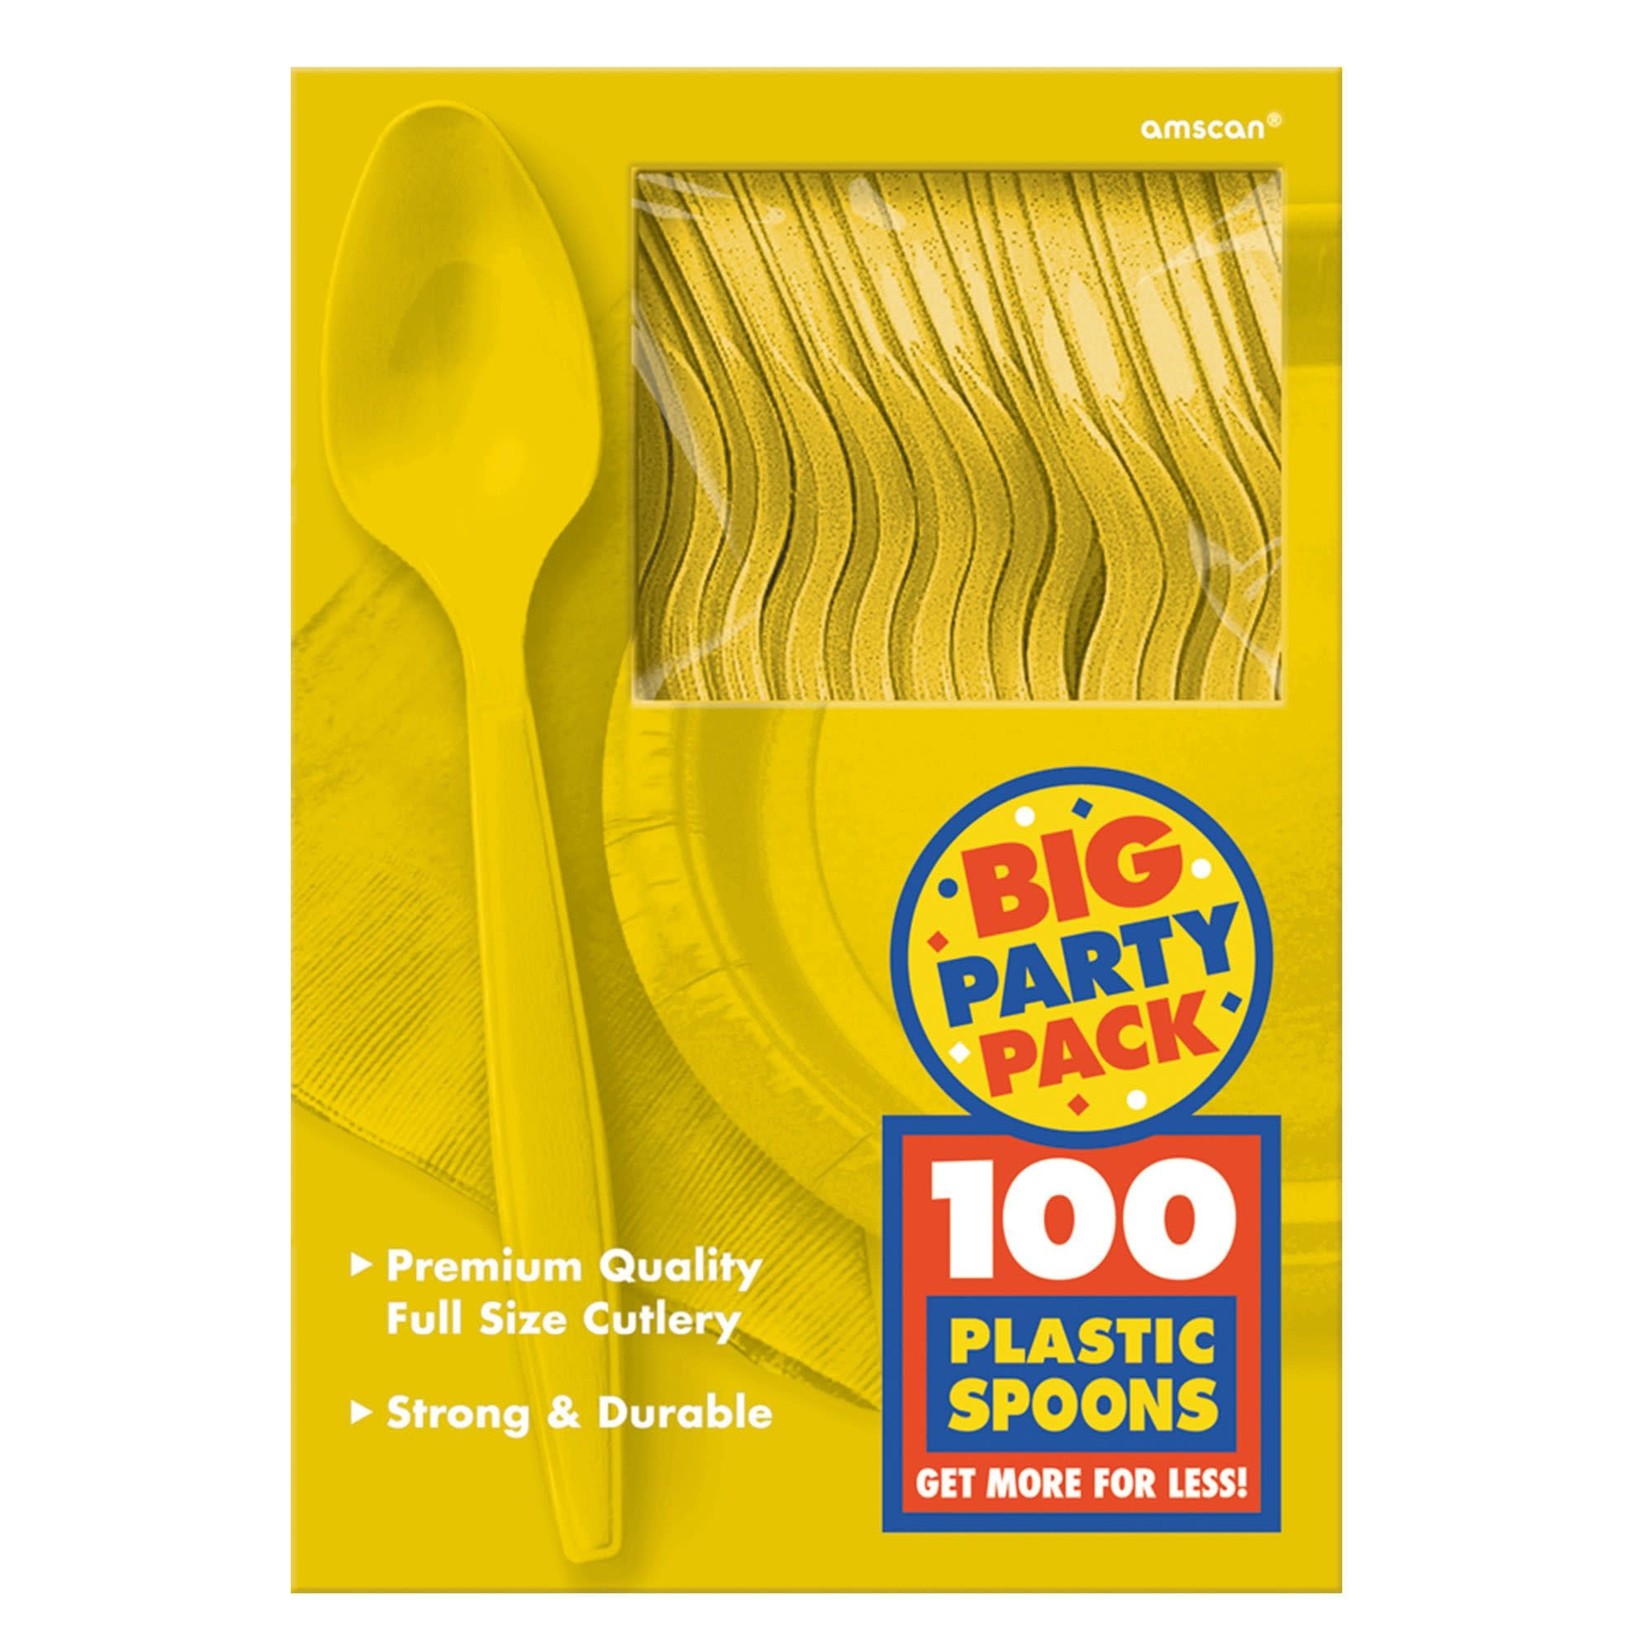 Big Party Pack Plastic Spoons - Yellow Sunshine